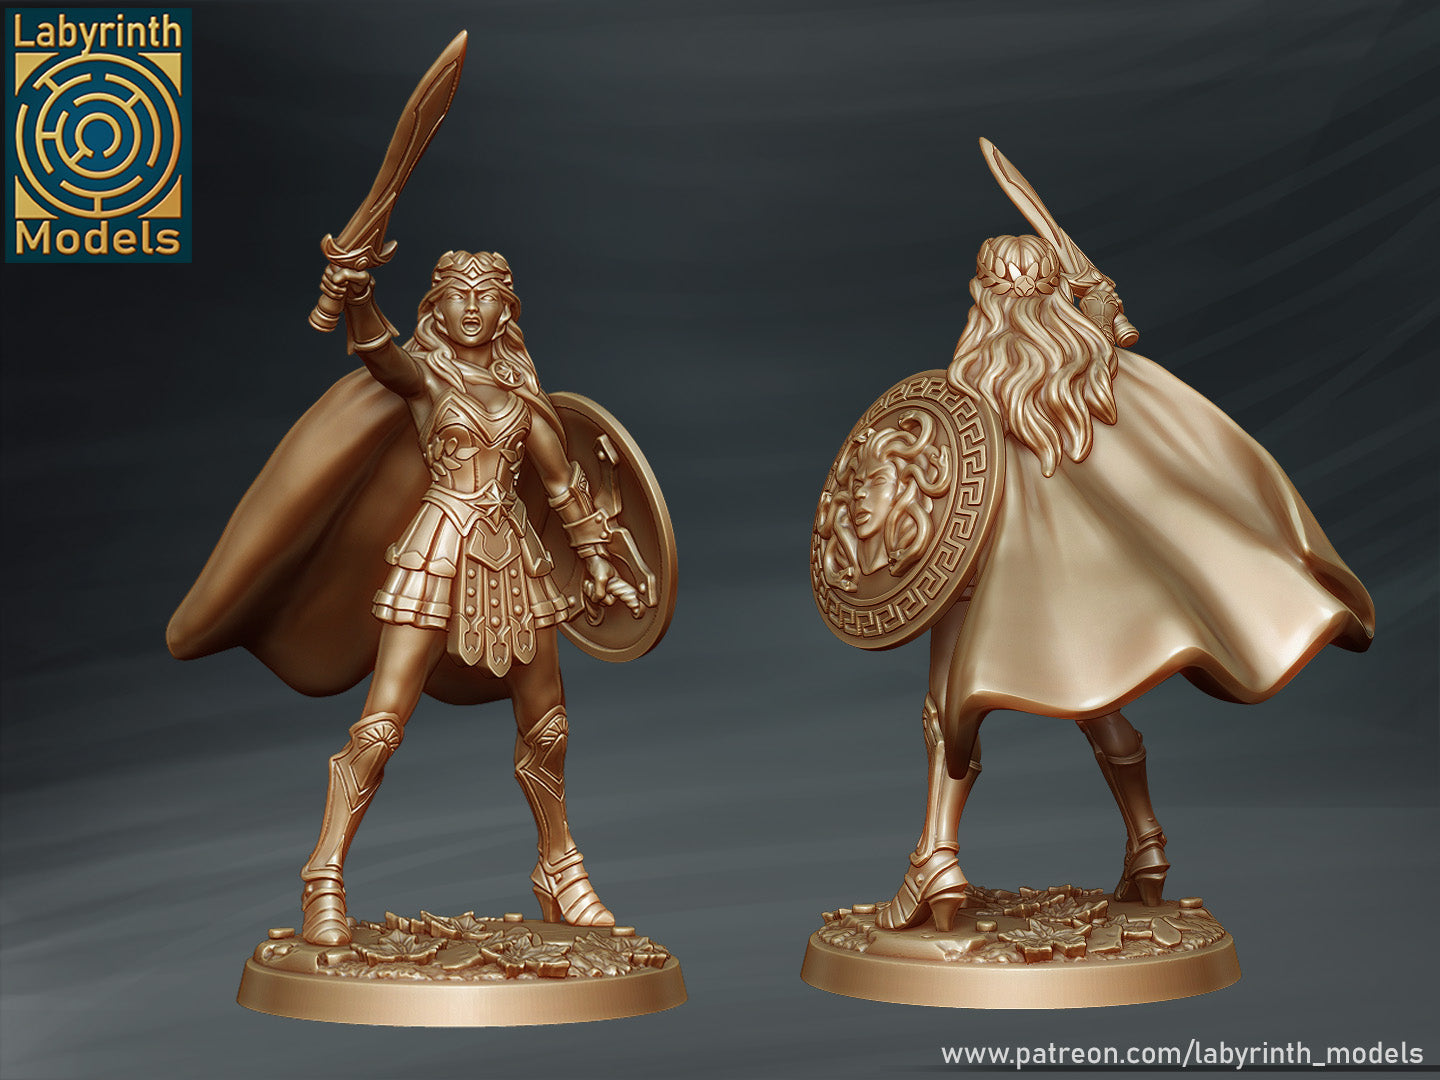 Andromeda with Sword and Shield by Labyrinth Models